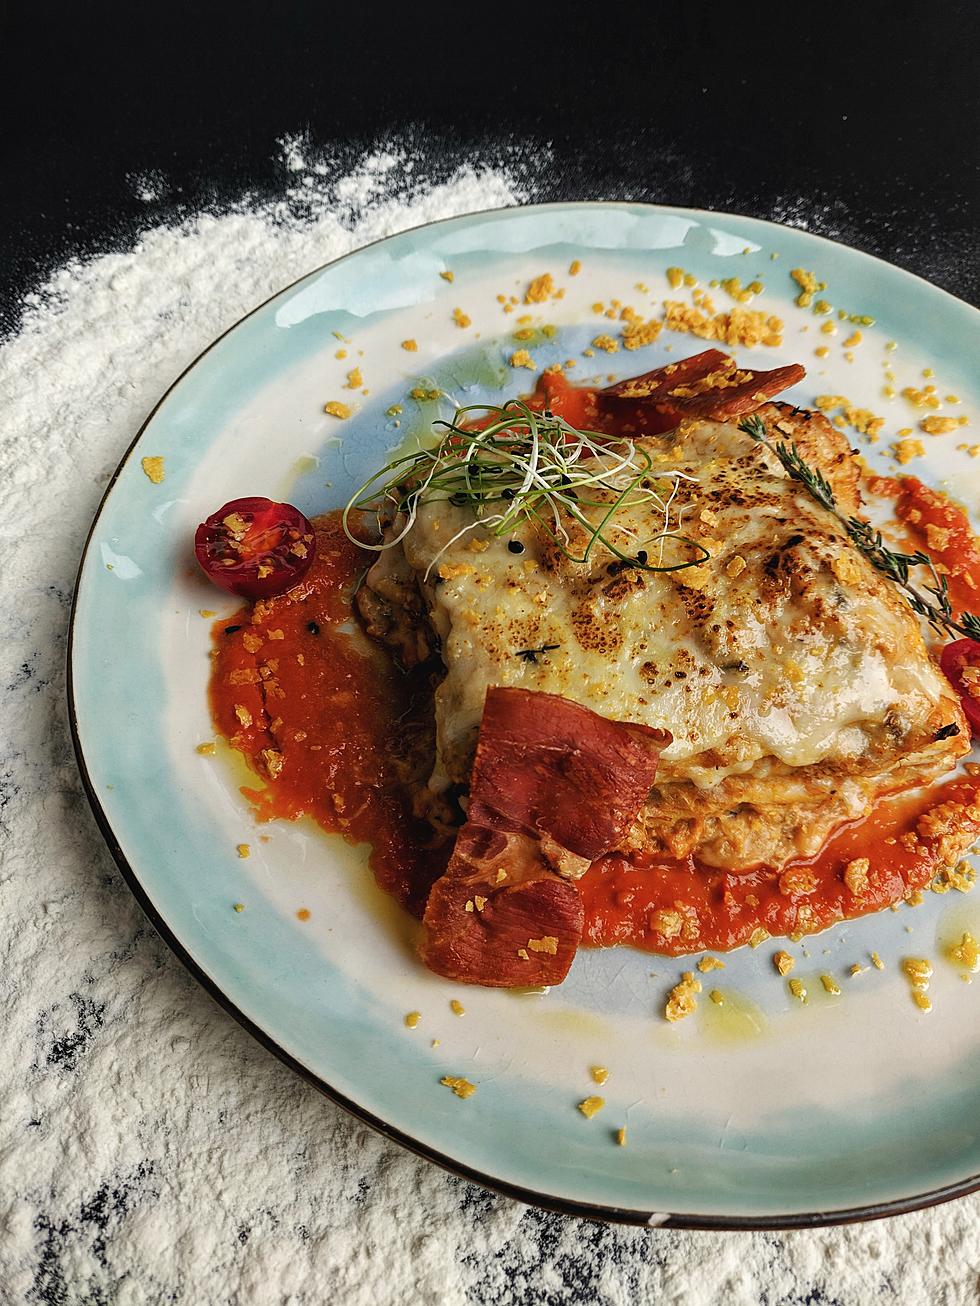 Want To Try New Jersey’s Best Lasagna For Yourself?